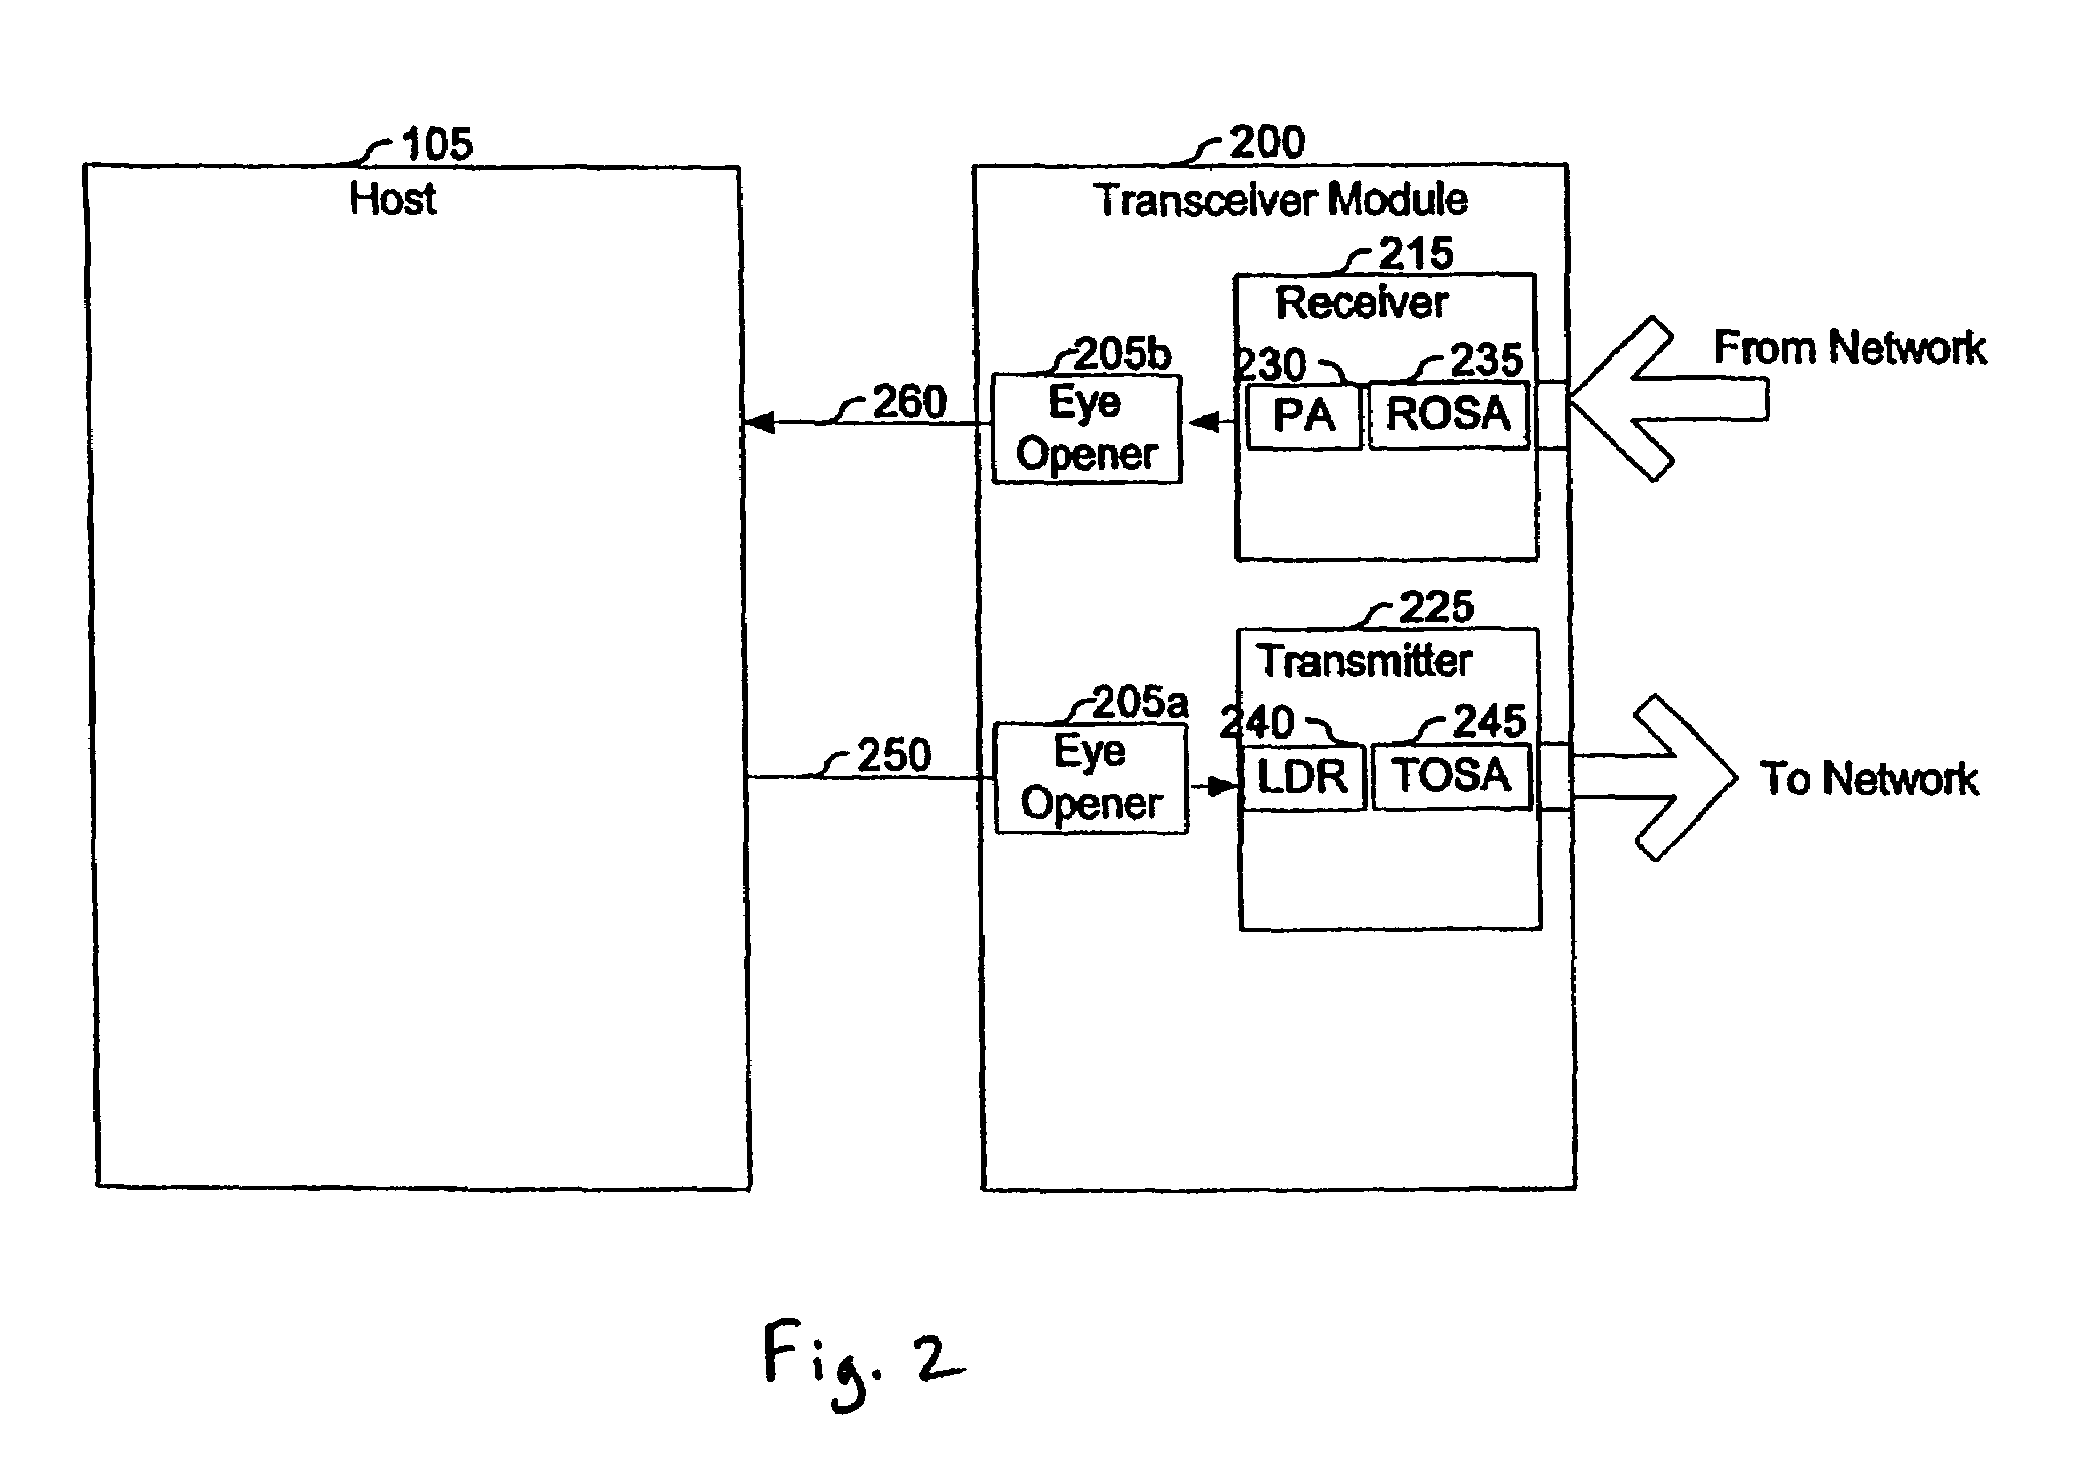 Integrated circuit with dual eye openers